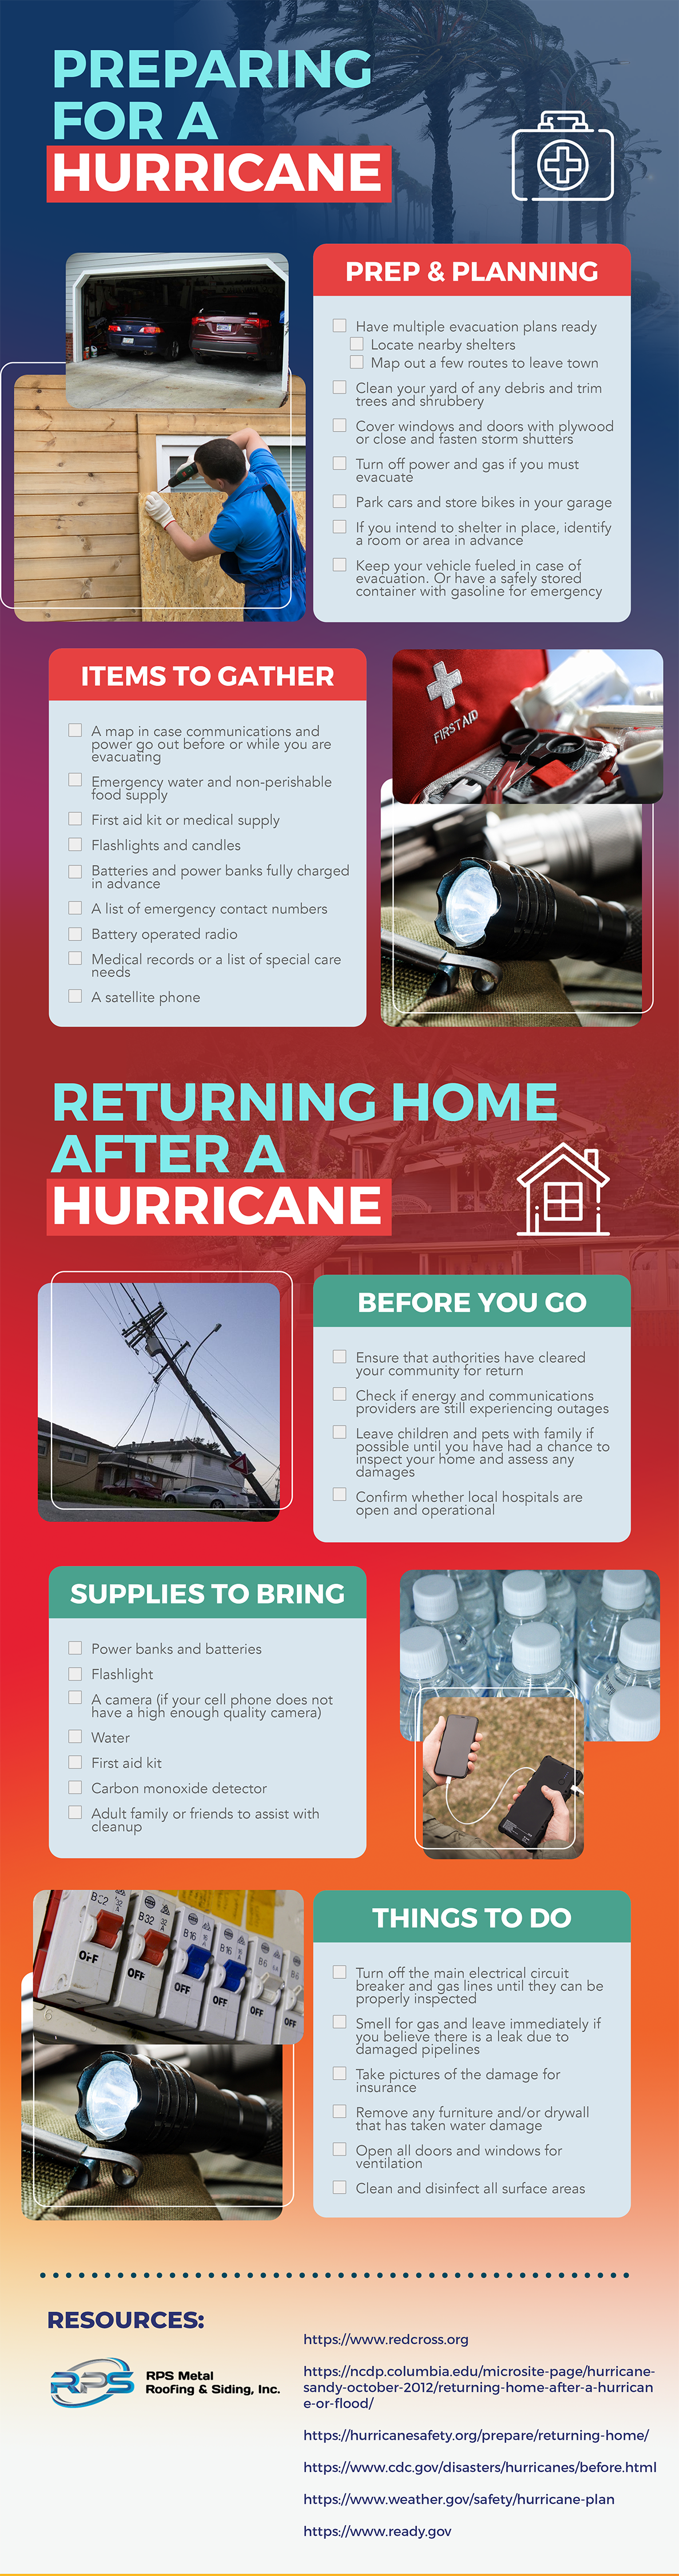 preparing for a hurricane infographic